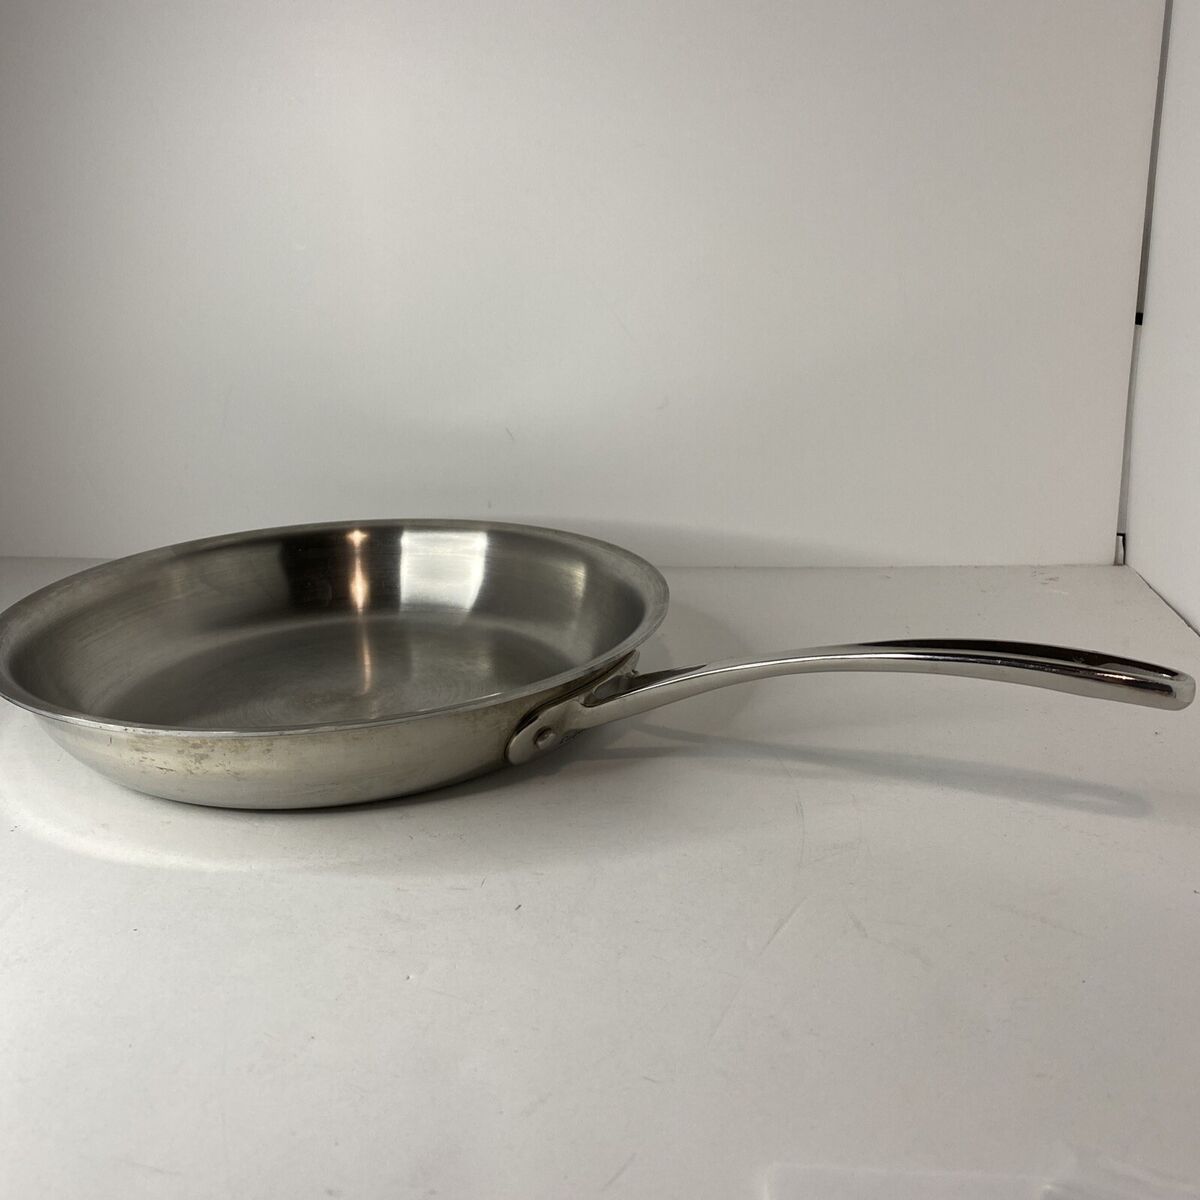 Simply Calphalon Stainless Steel 1390 10 inch Skillet Fry Saute Pan